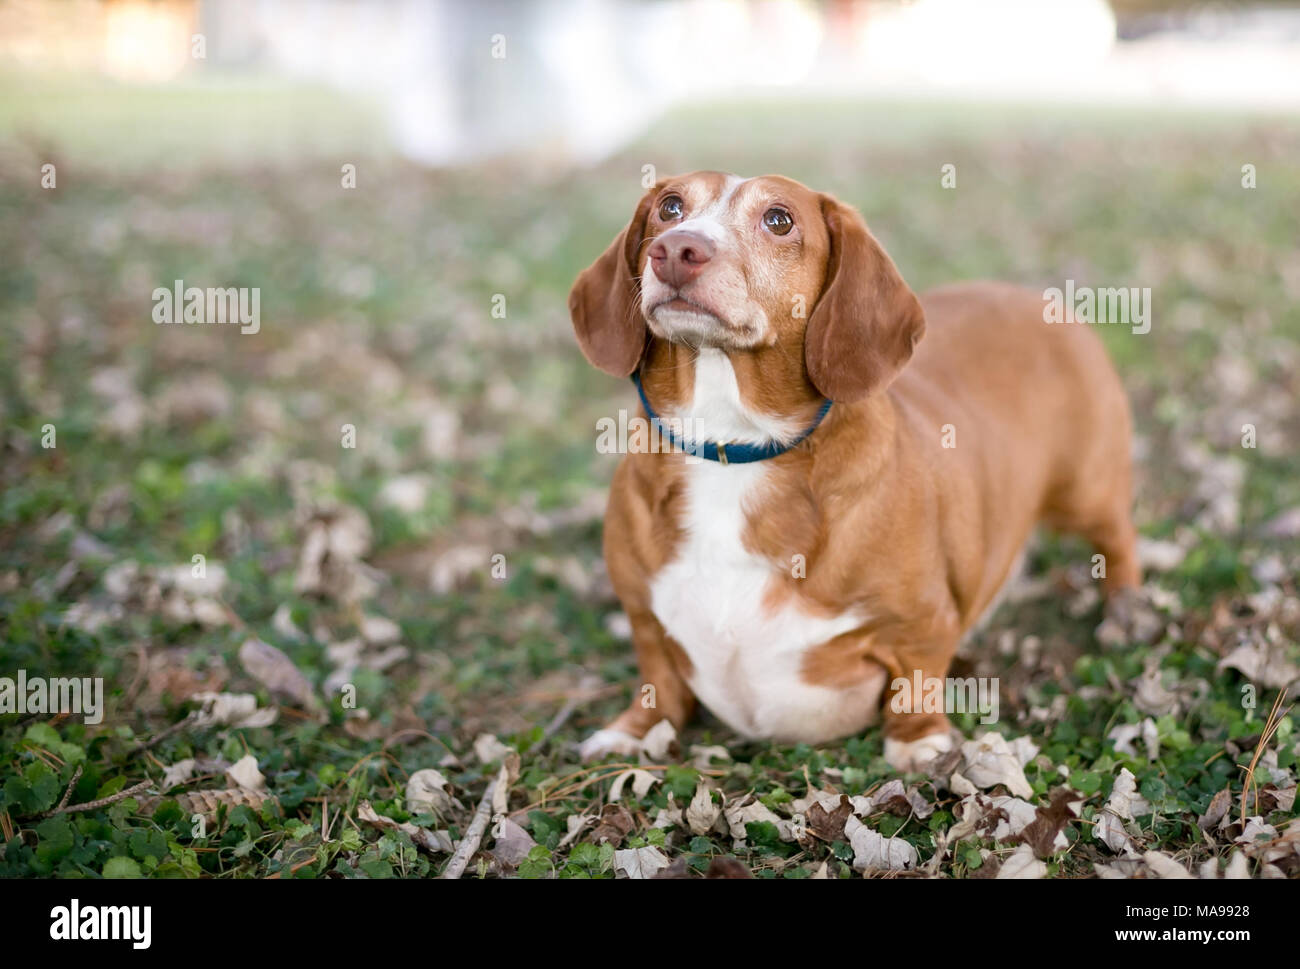 Portrait of a red and white Dachshund mix dog outdoors surrounded by leaves Stock Photo